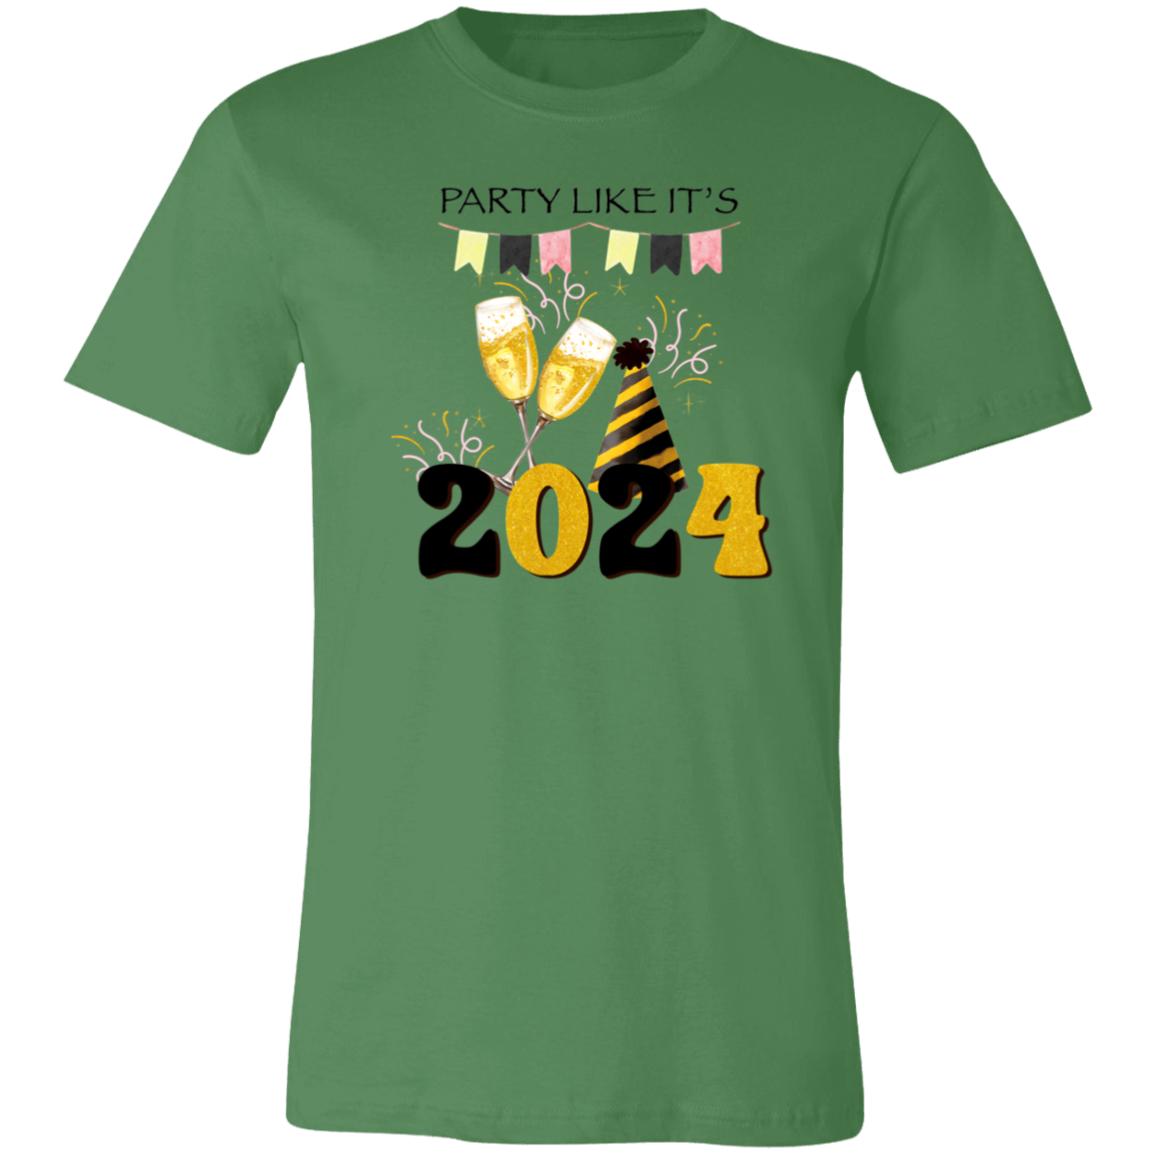 Party Like It's 2024  Shirt